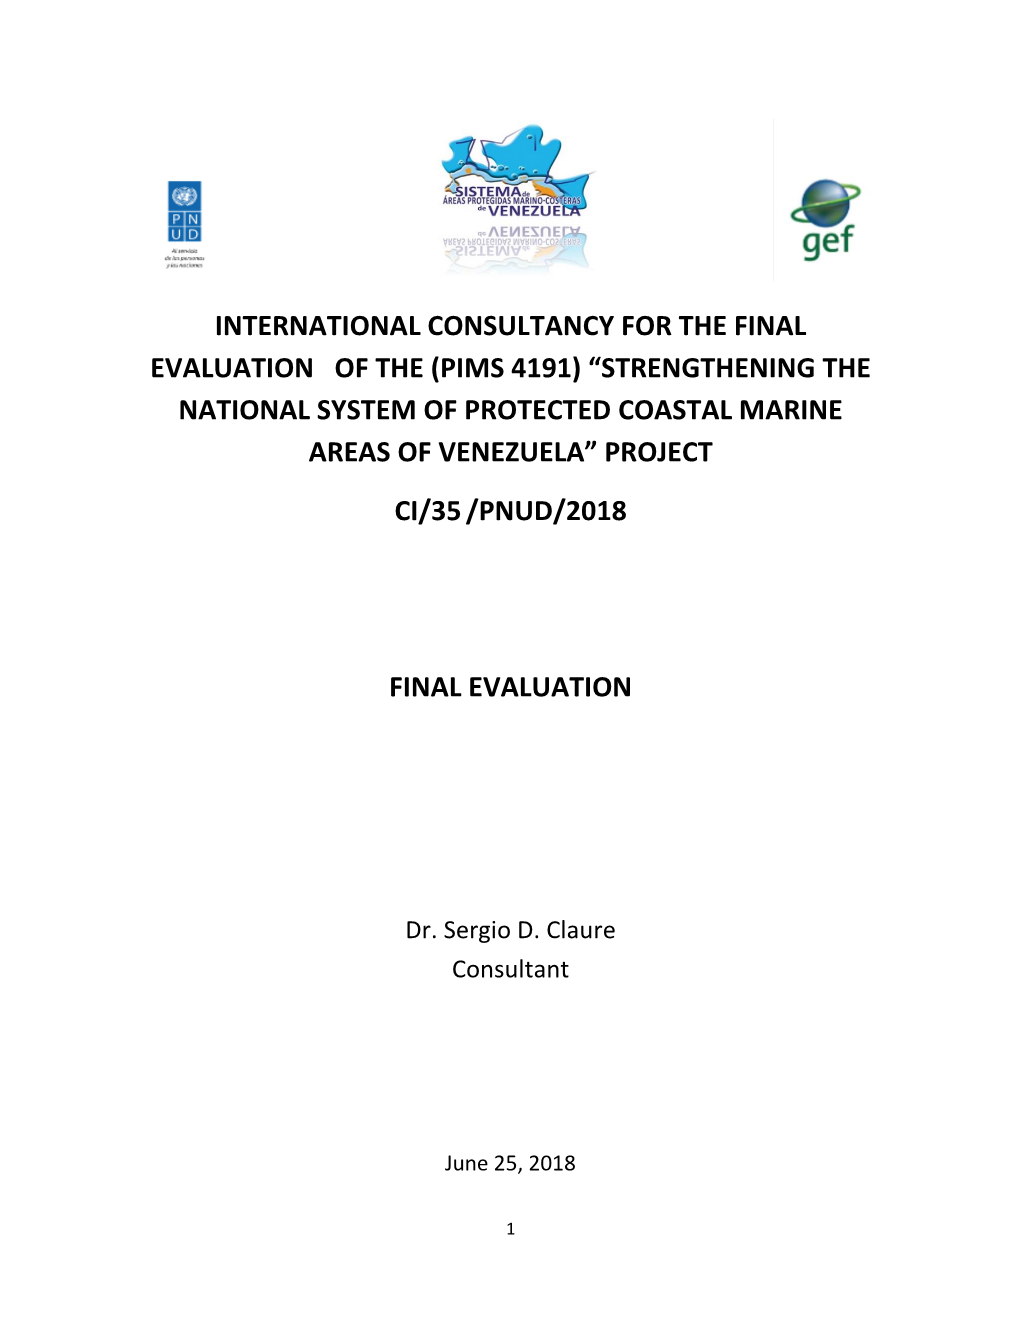 International Consultancy for the Final